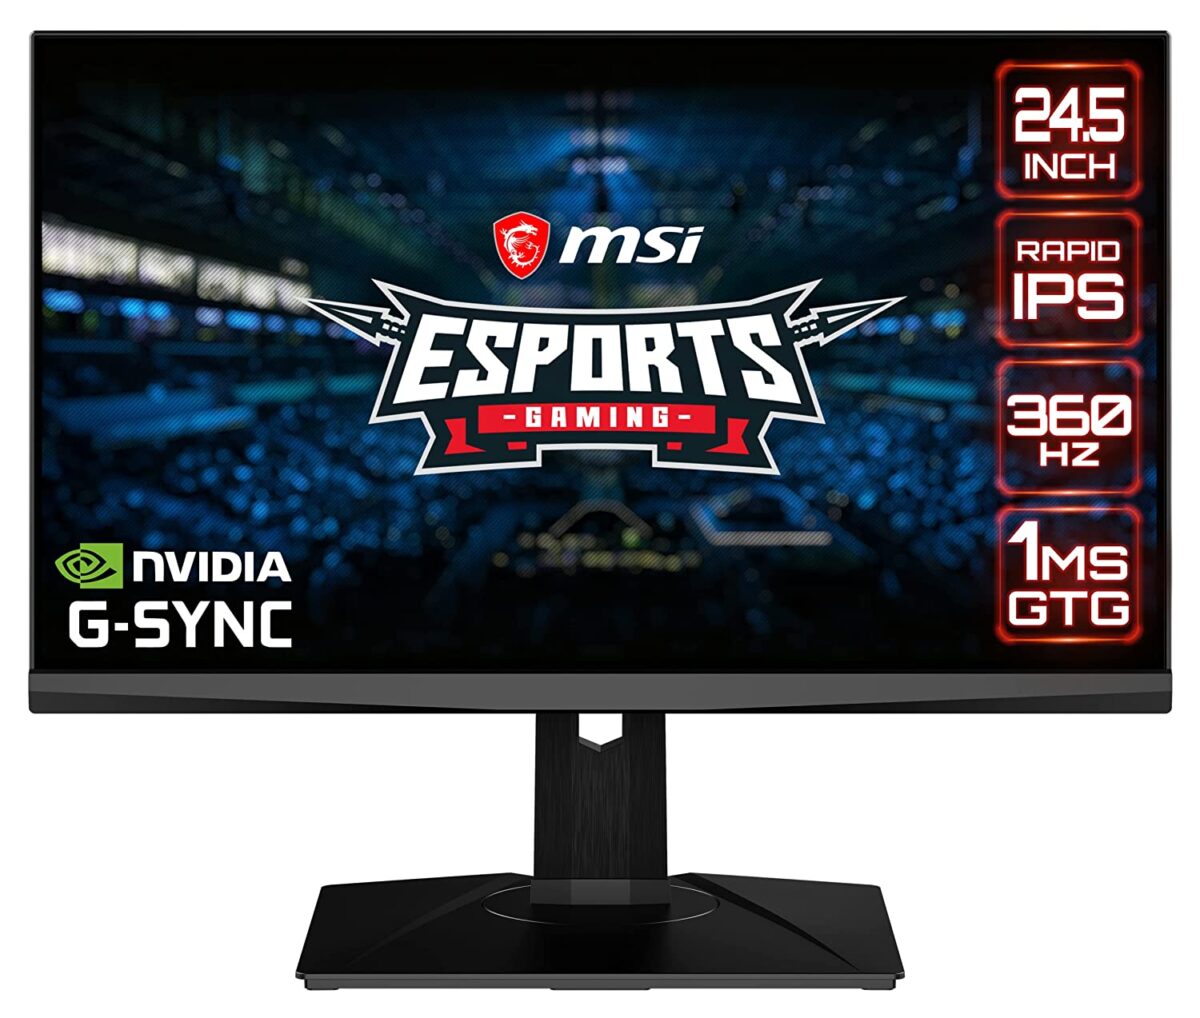 MSI Oculux NXG253R 360Hz Gaming Monitor Launched in India | Check Price, Availability